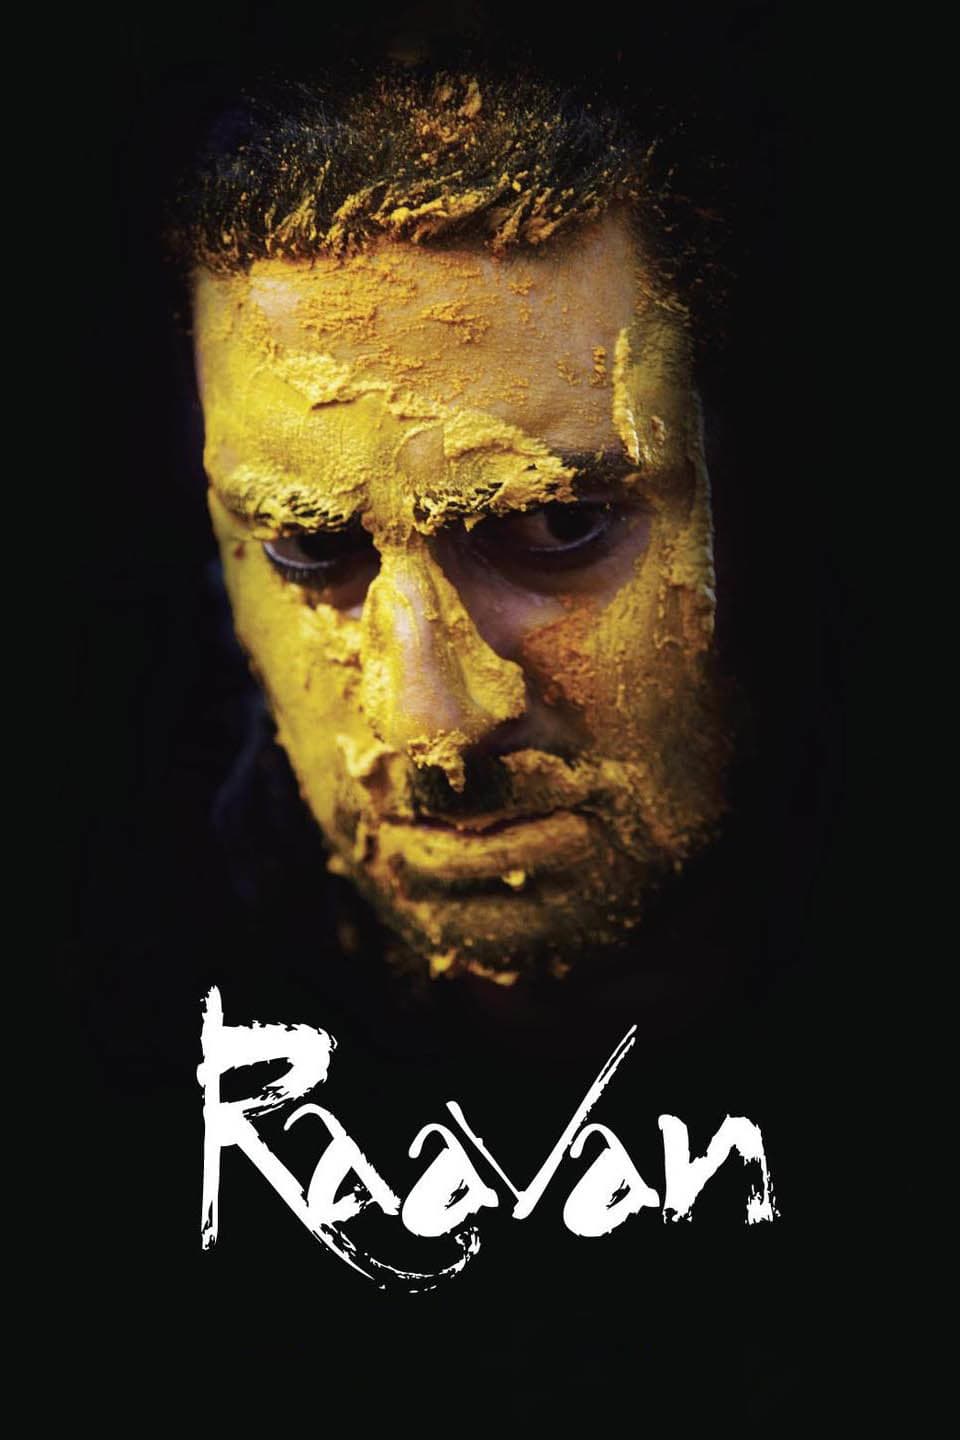 Poster for the movie "Raavan"